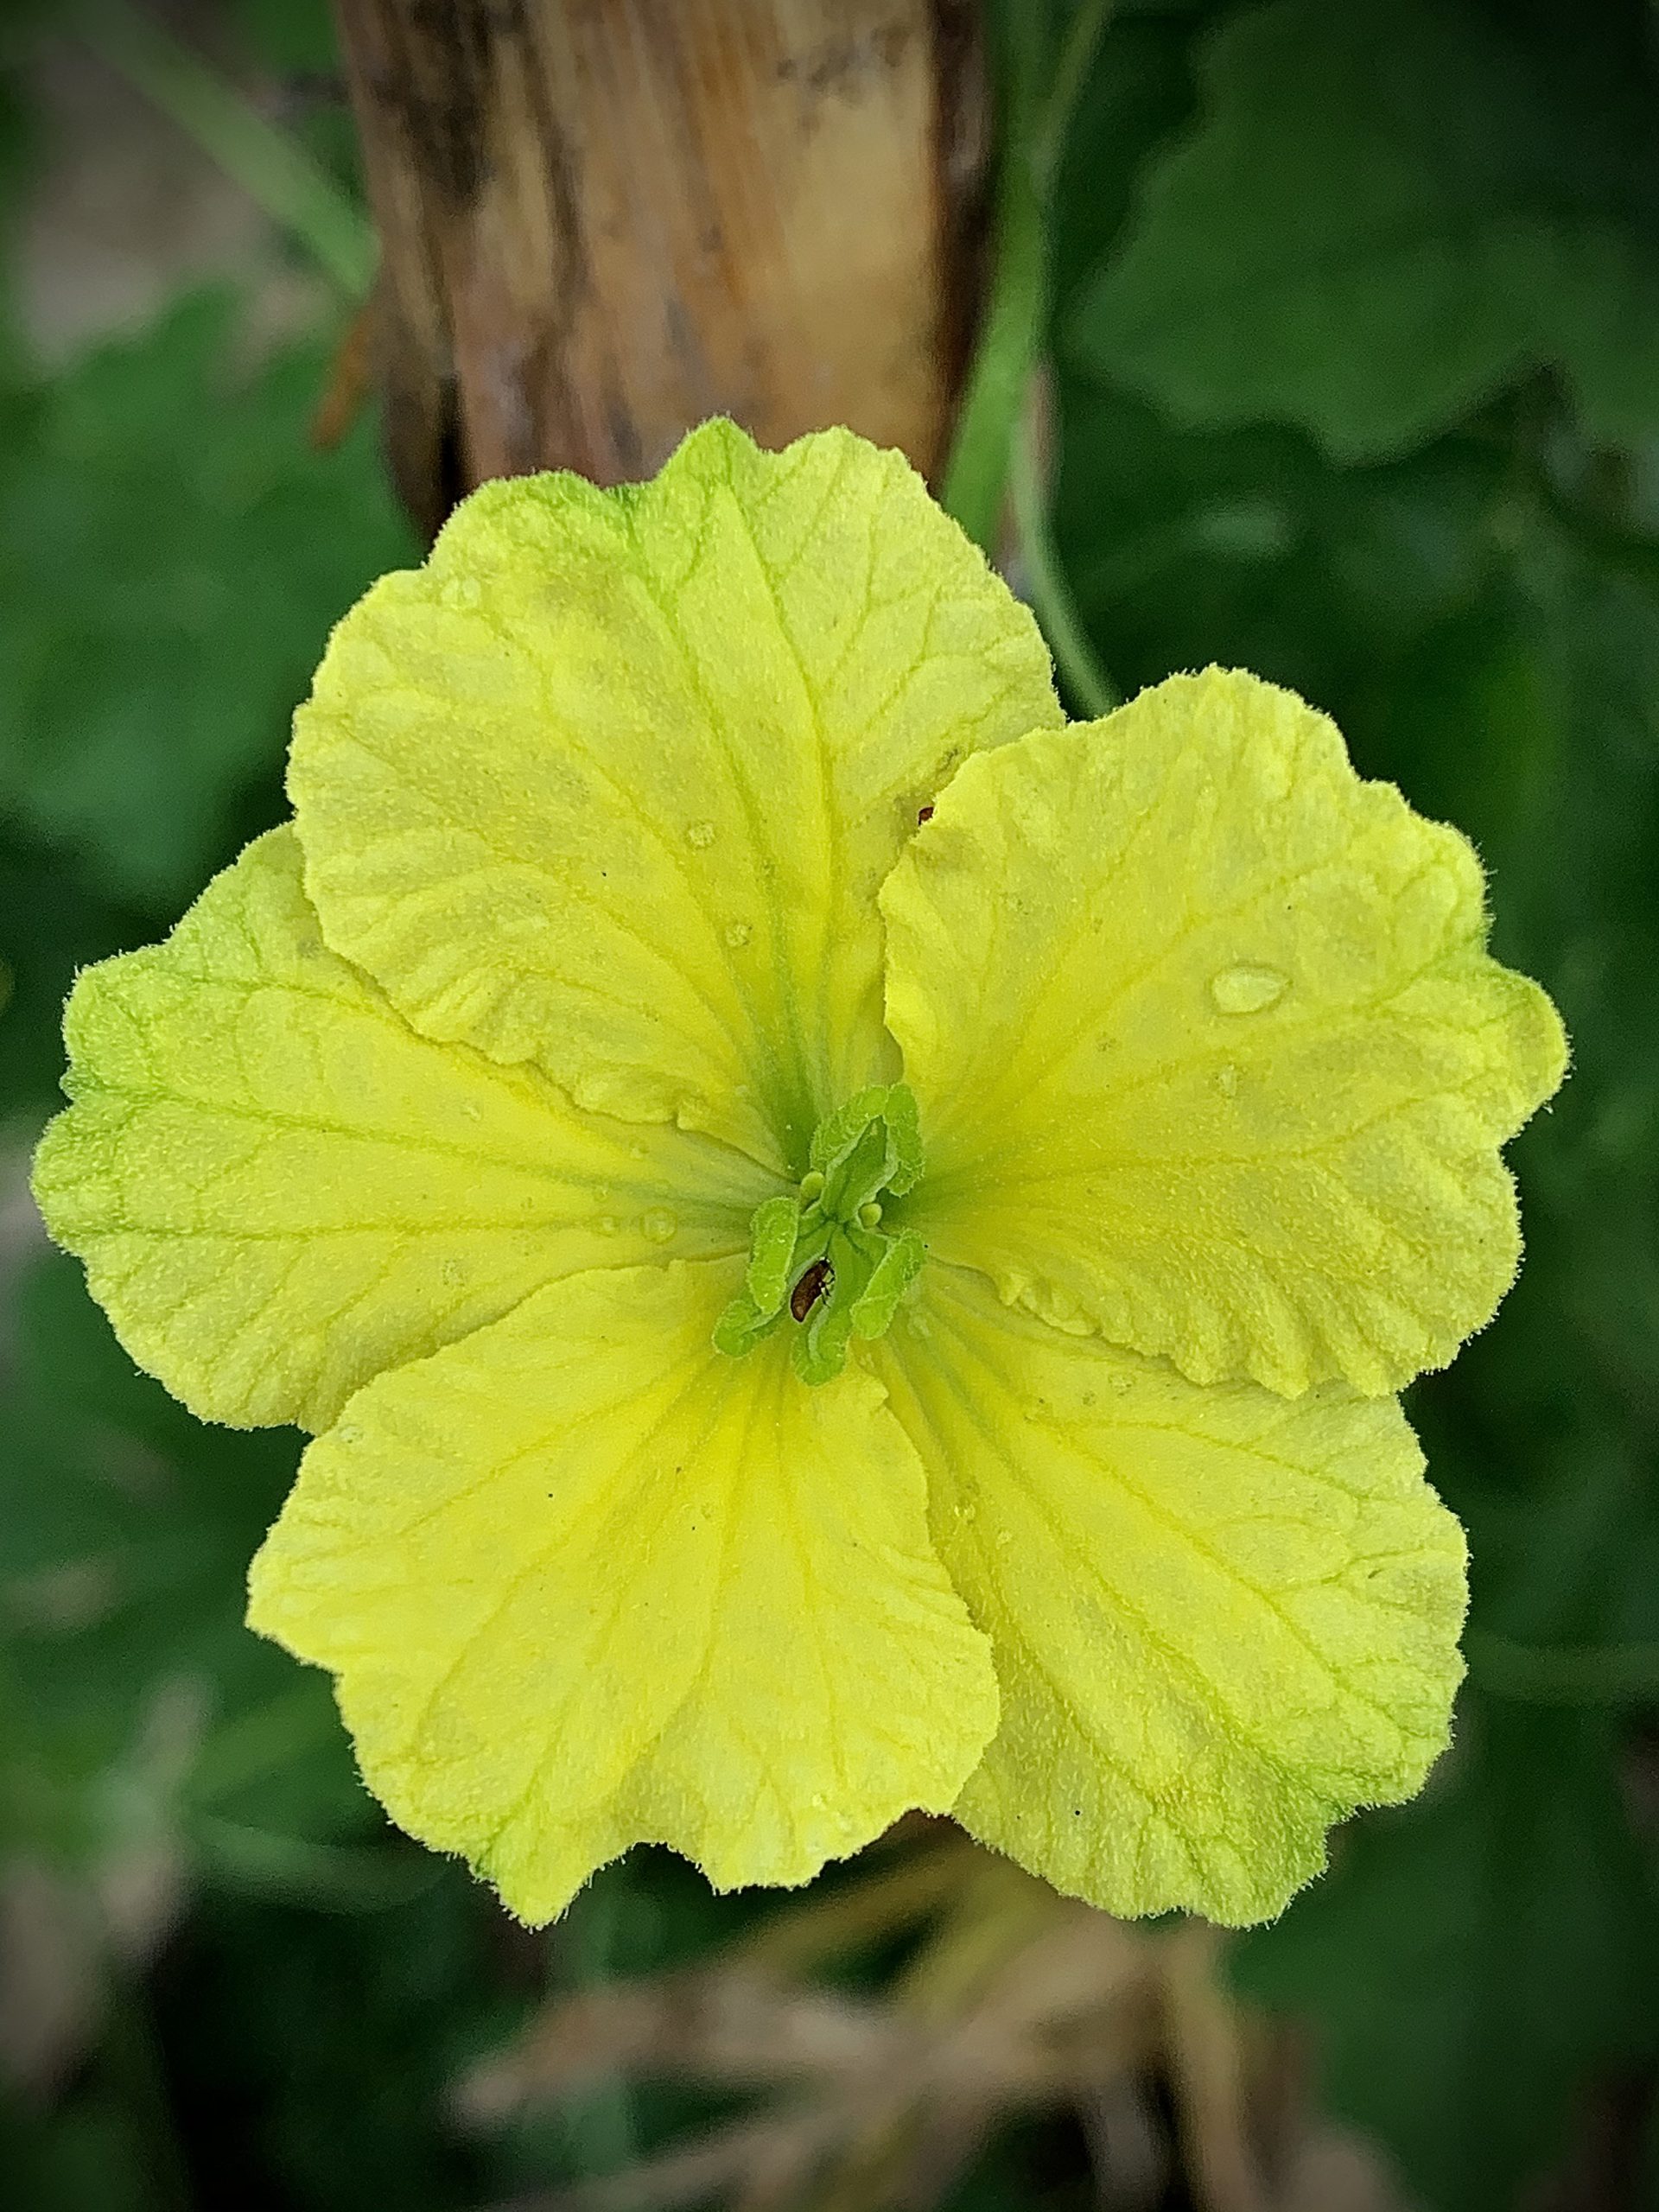 A yellow coloured flower